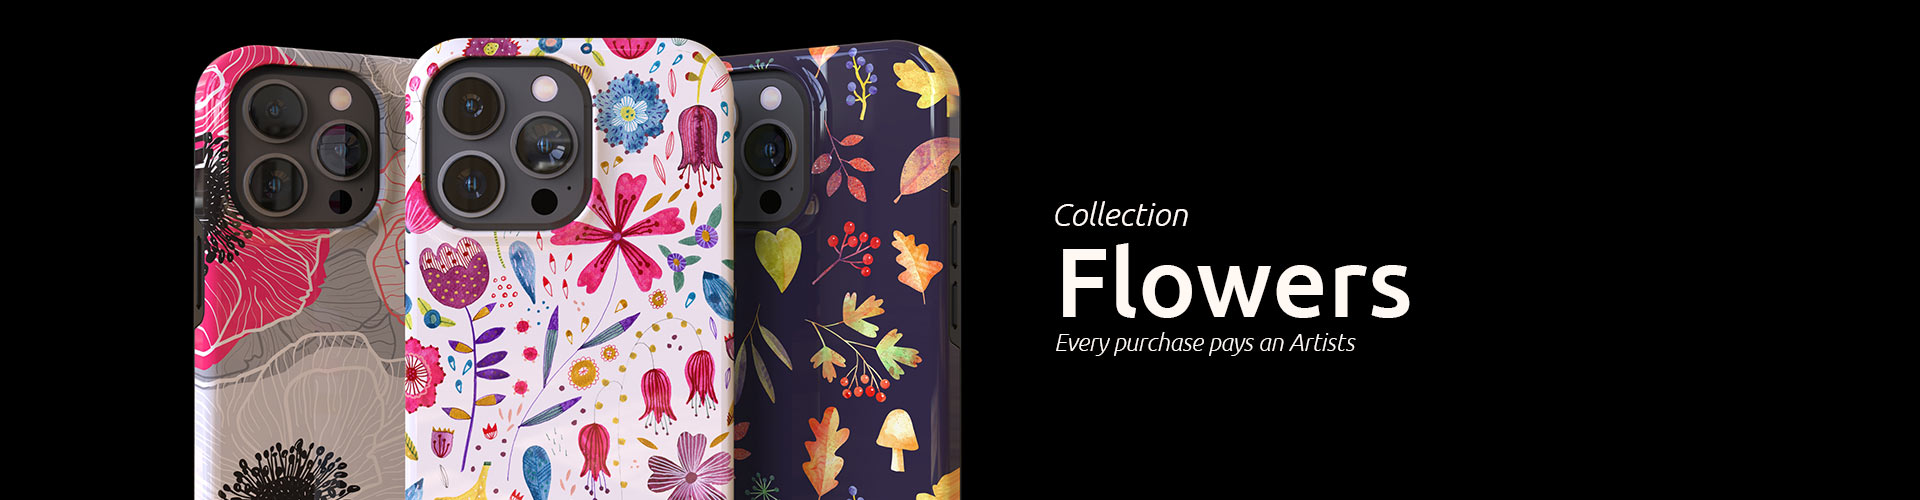 flowers collections